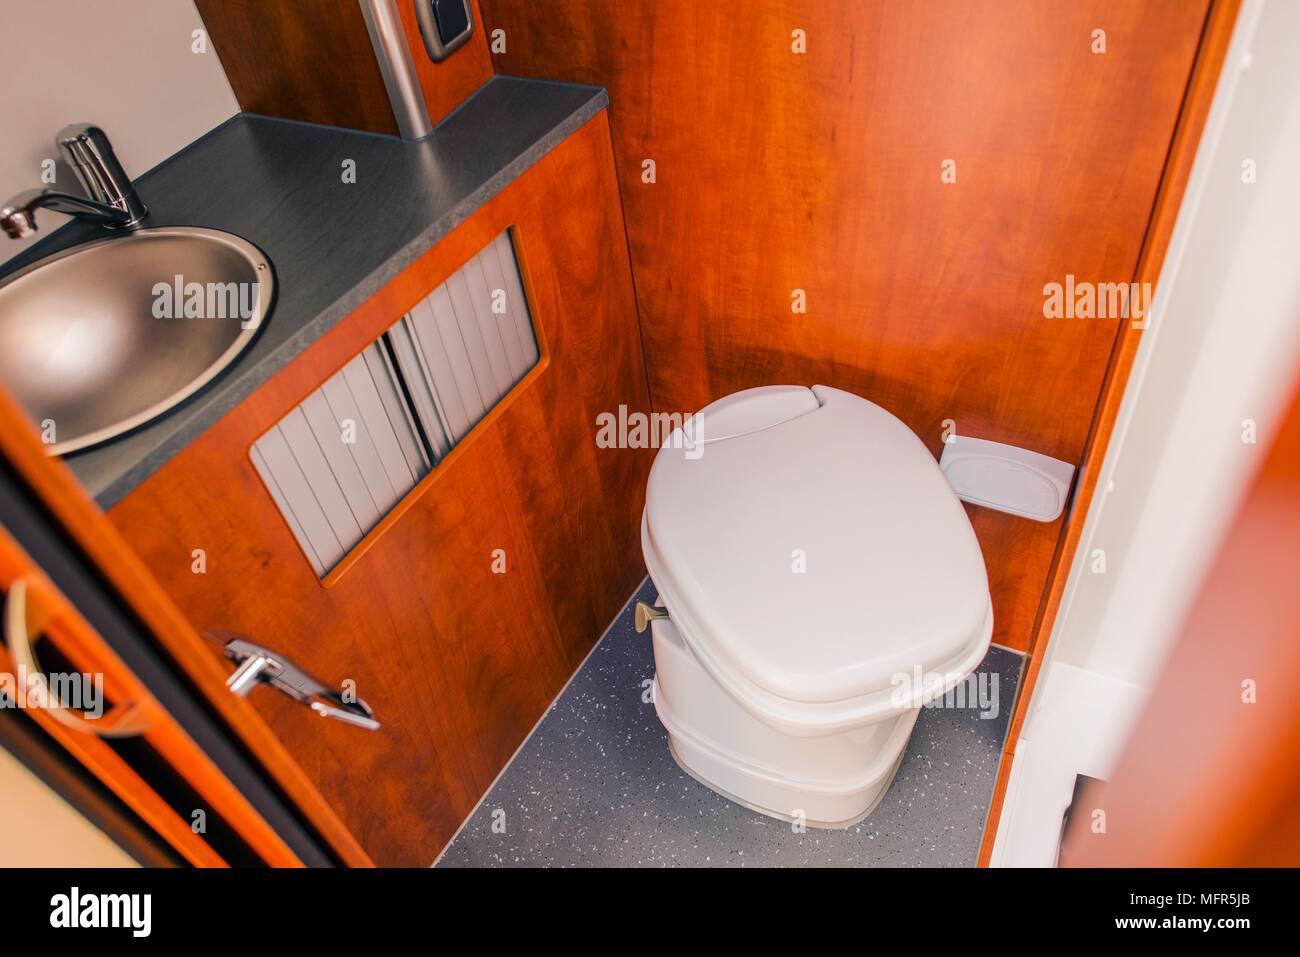 Elegant Camper RV Bathroom with Cassette Toilet. Rving in Style. Stock Photo